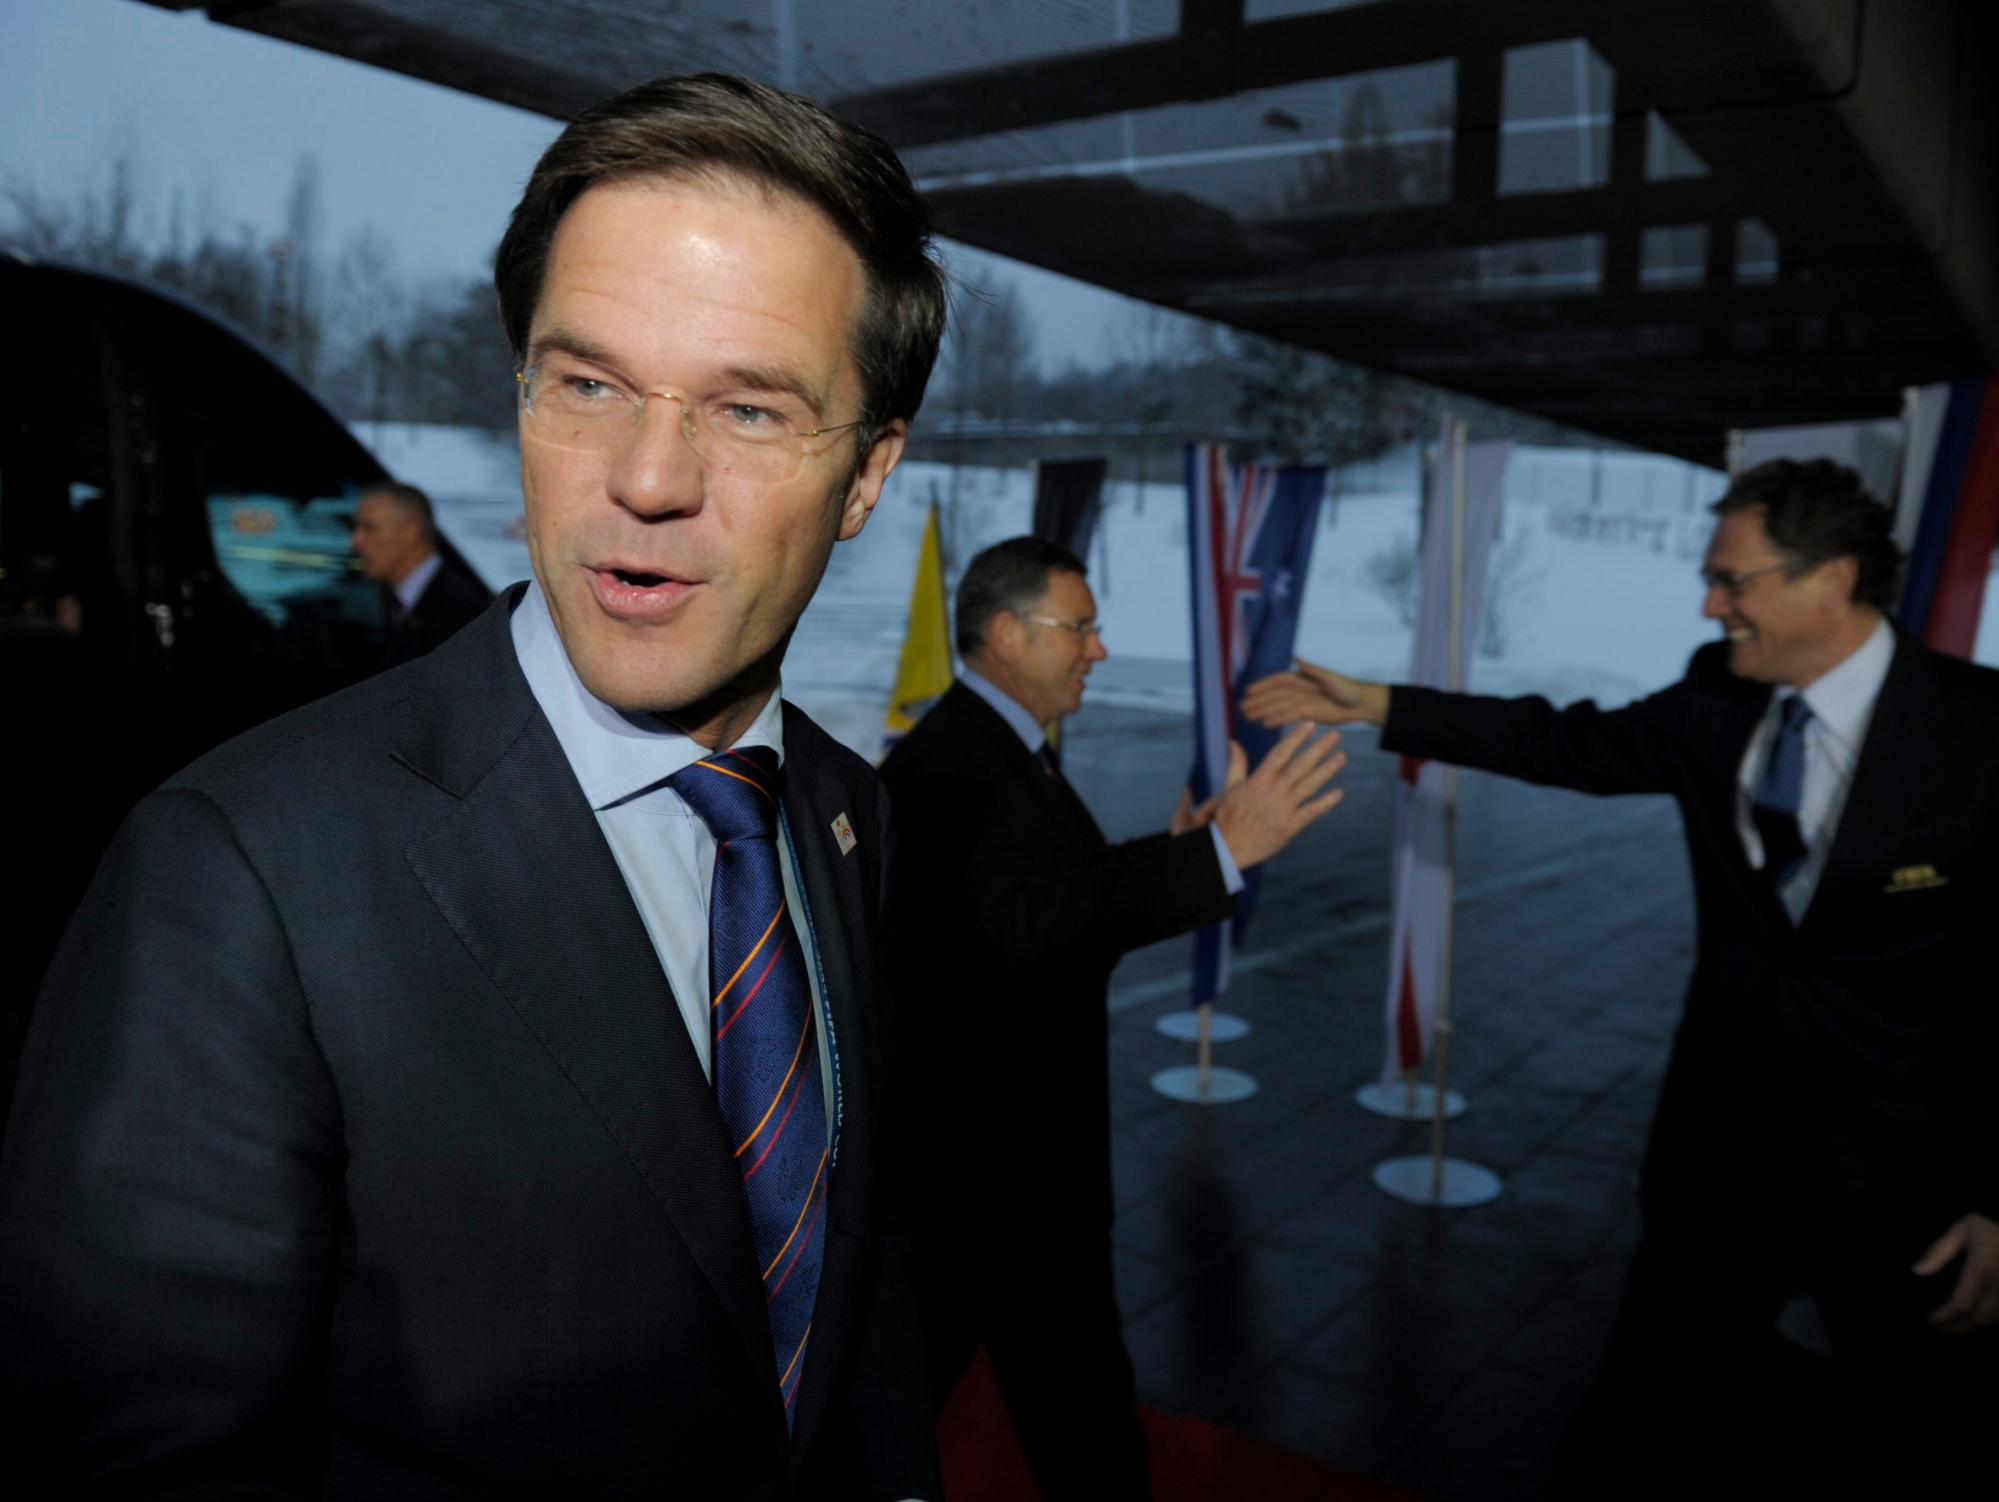 Mark Rutte, left, Prime Minister of the Netherlands, and the delegation arrive at the FIFA headquarters in Zurich, Switzerland, on Thursday, December 2, 2010, to present their bid to host the soccer World Cup 2018. (KEYSTONE/Steffen Schmidt) SWITZERLAND FIFA WORLD CUP